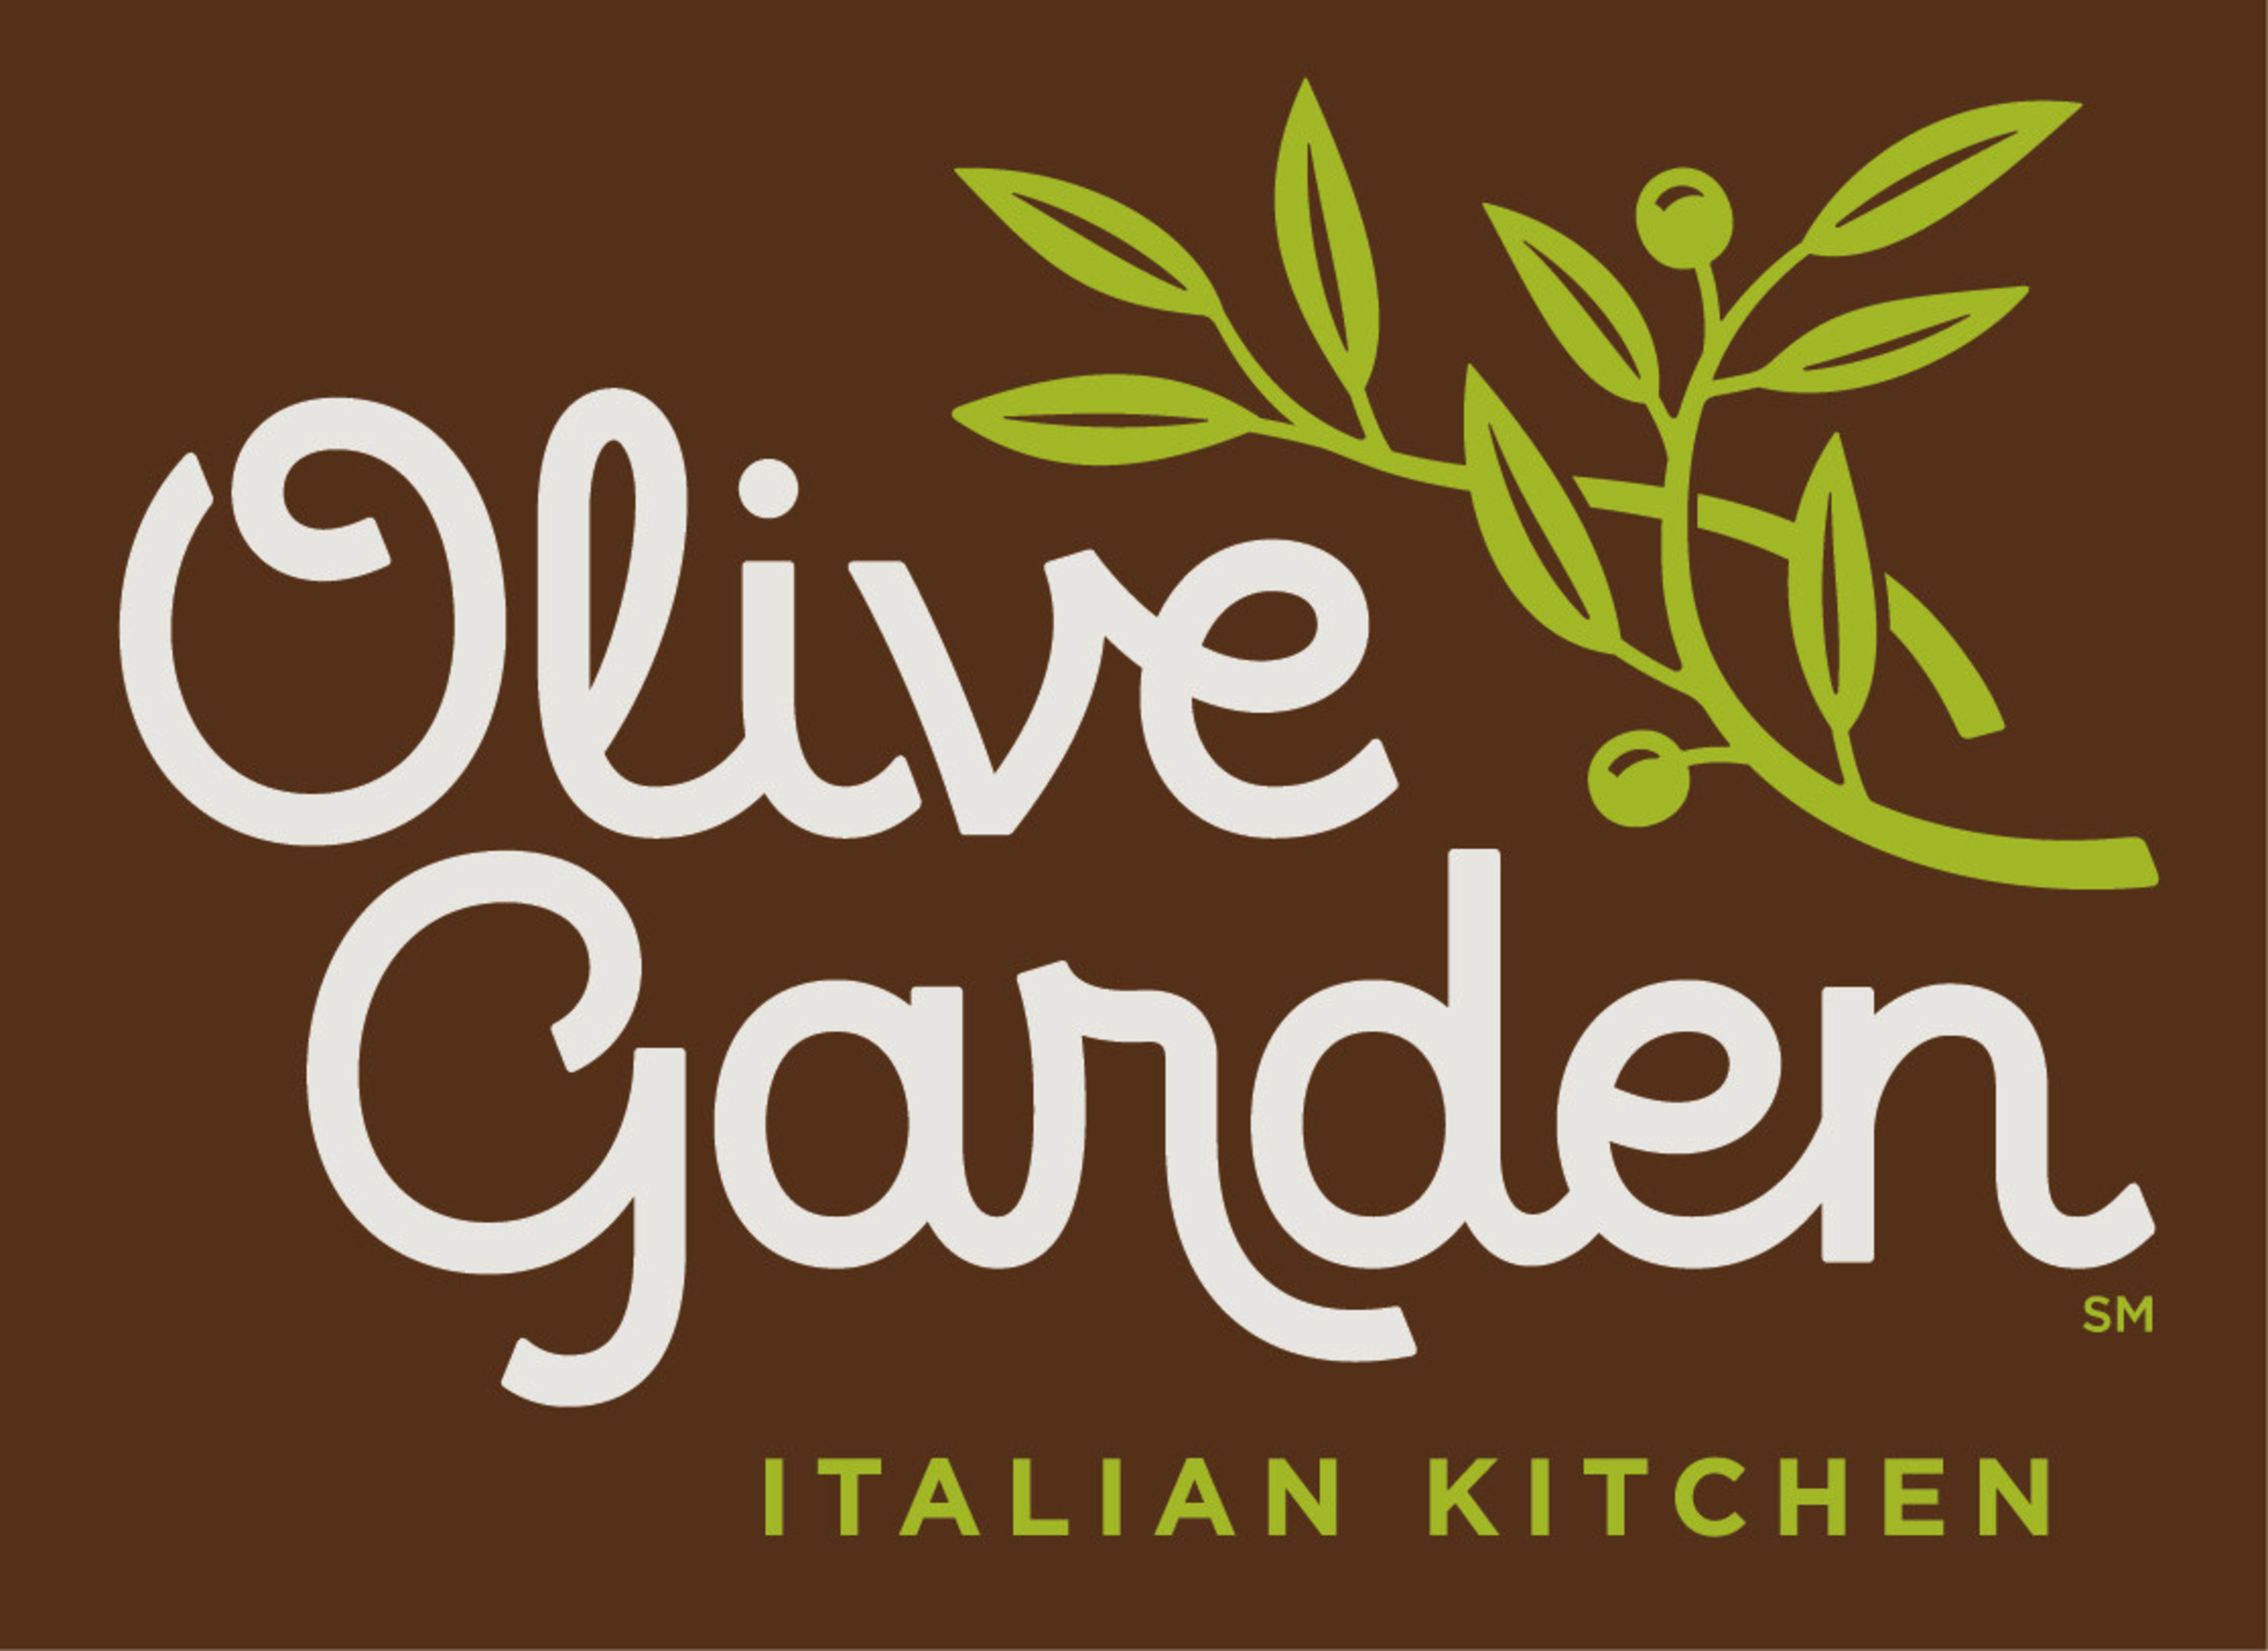 Olive Garden | Get a free entrée from a special menu when you dine in on November 11th.